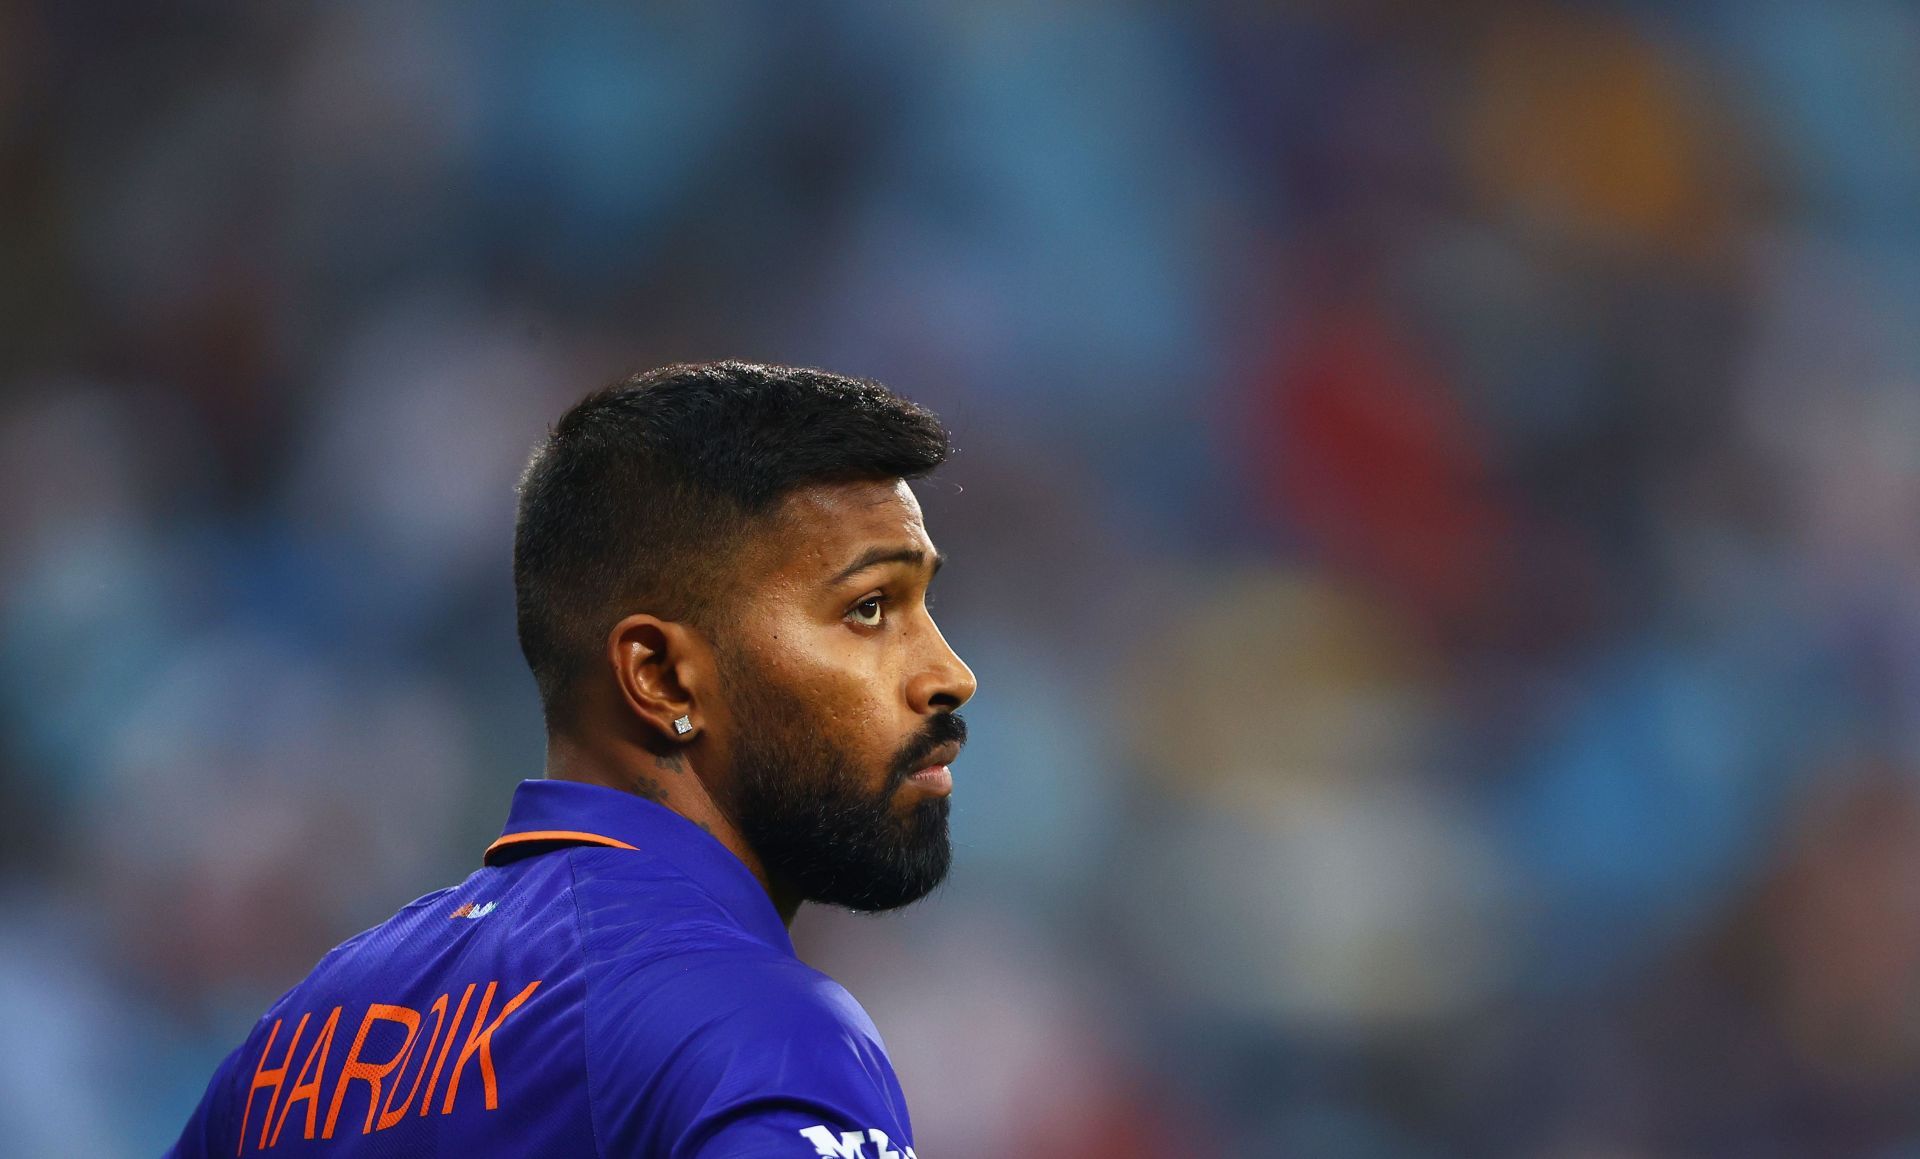 Hardik Pandya is finally translating all his promise to perfomances